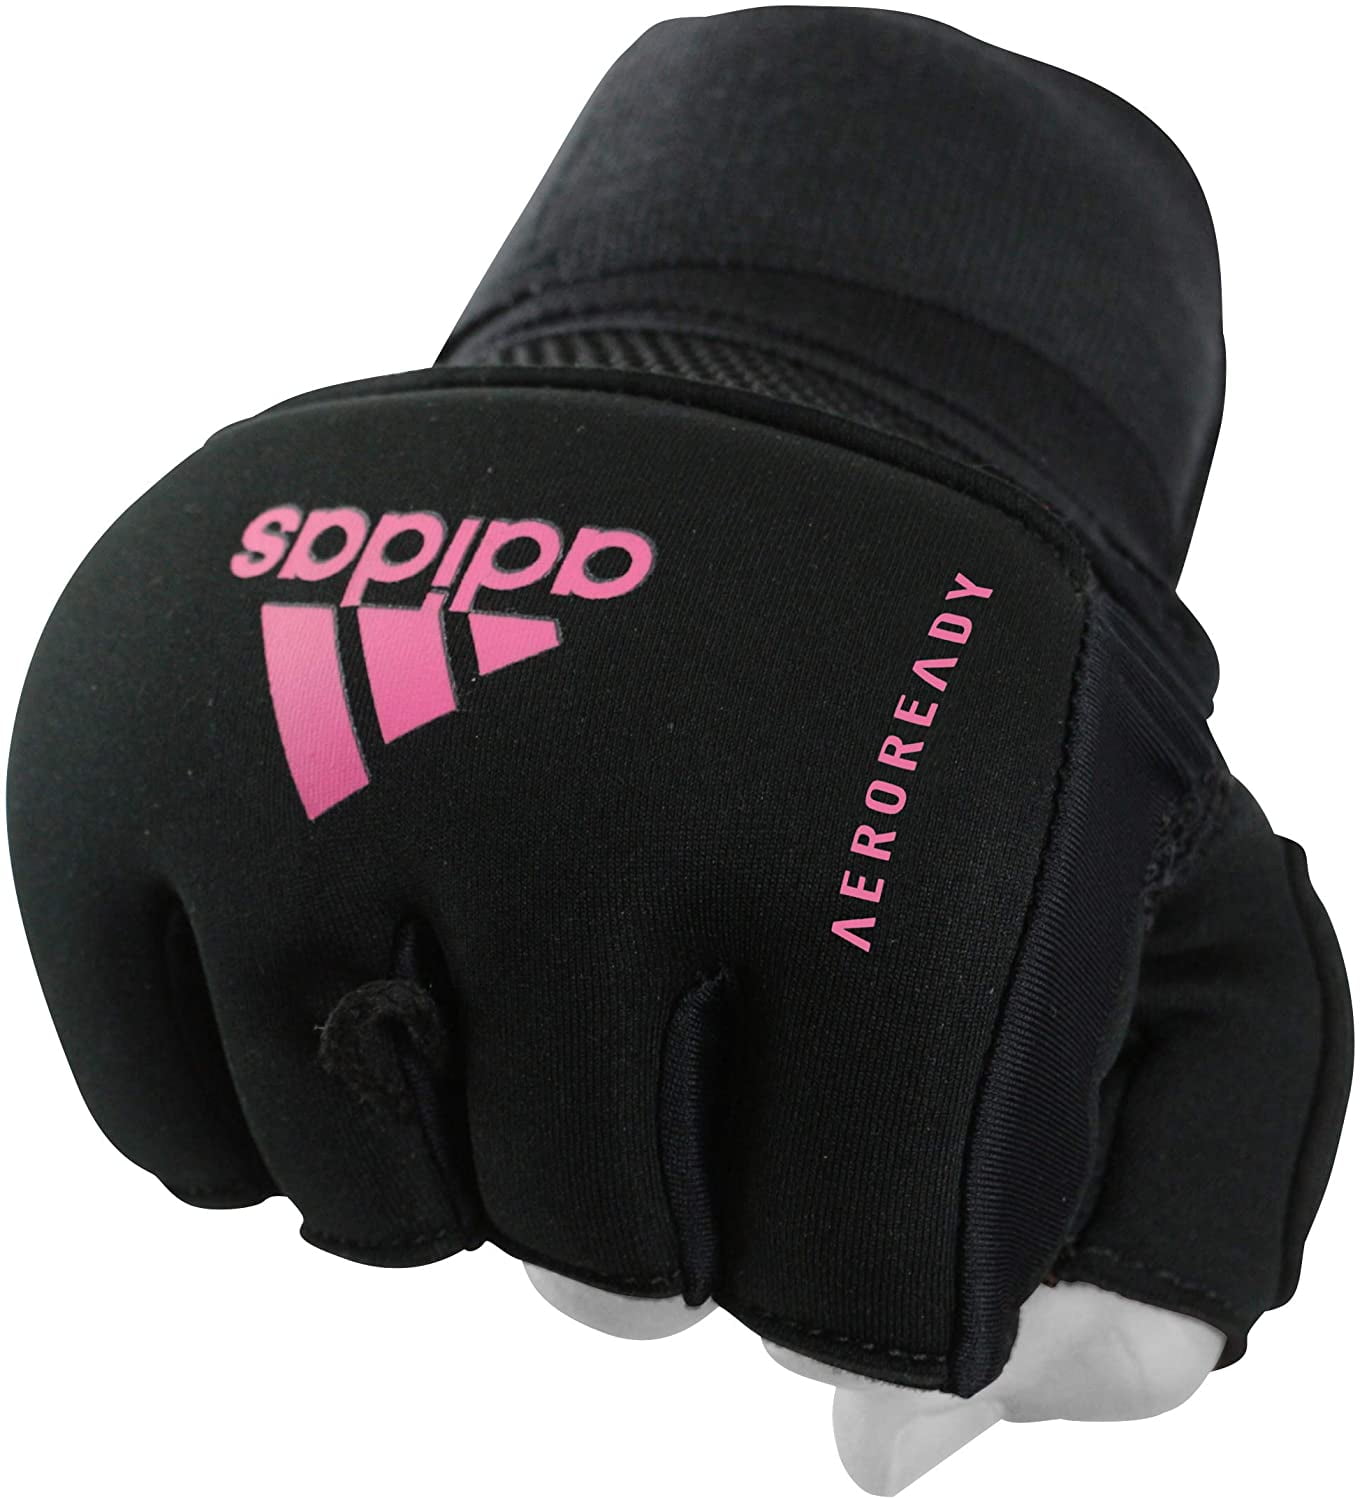 ARD FOAM PADDED INNER GLOVES WITH WRAPS MUAY THAI BOXING MARTIAL ARTS Pink S-XL 